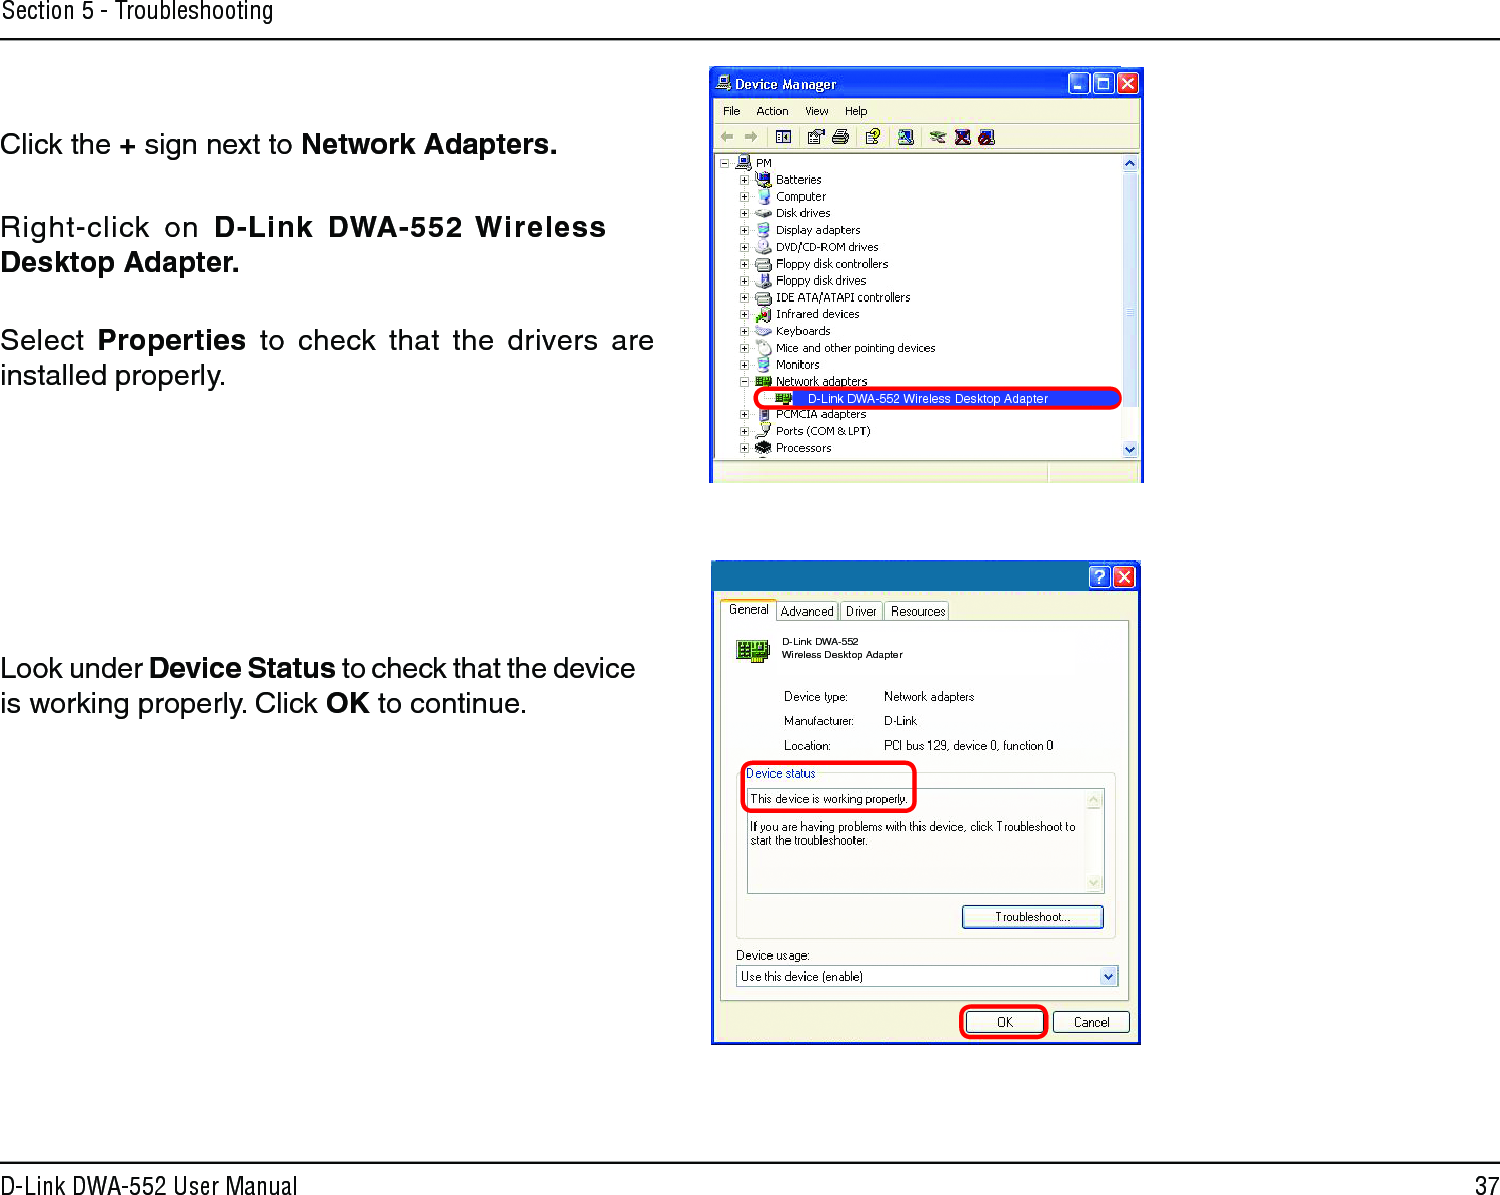 37D-Link DWA-552 User ManualSection 5 - TroubleshootingClick the + sign next to Network Adapters.Right-click  on  D-Link  DWA-552 Wireless Desktop Adapter.Select  Properties  to  check  that  the  drivers  are installed properly.Look under Device Status to check that the device is working properly. Click OK to continue.D-Link DWA-552 Wireless Desktop AdapterD-Link DWA-552 Wireless Desktop Adapter